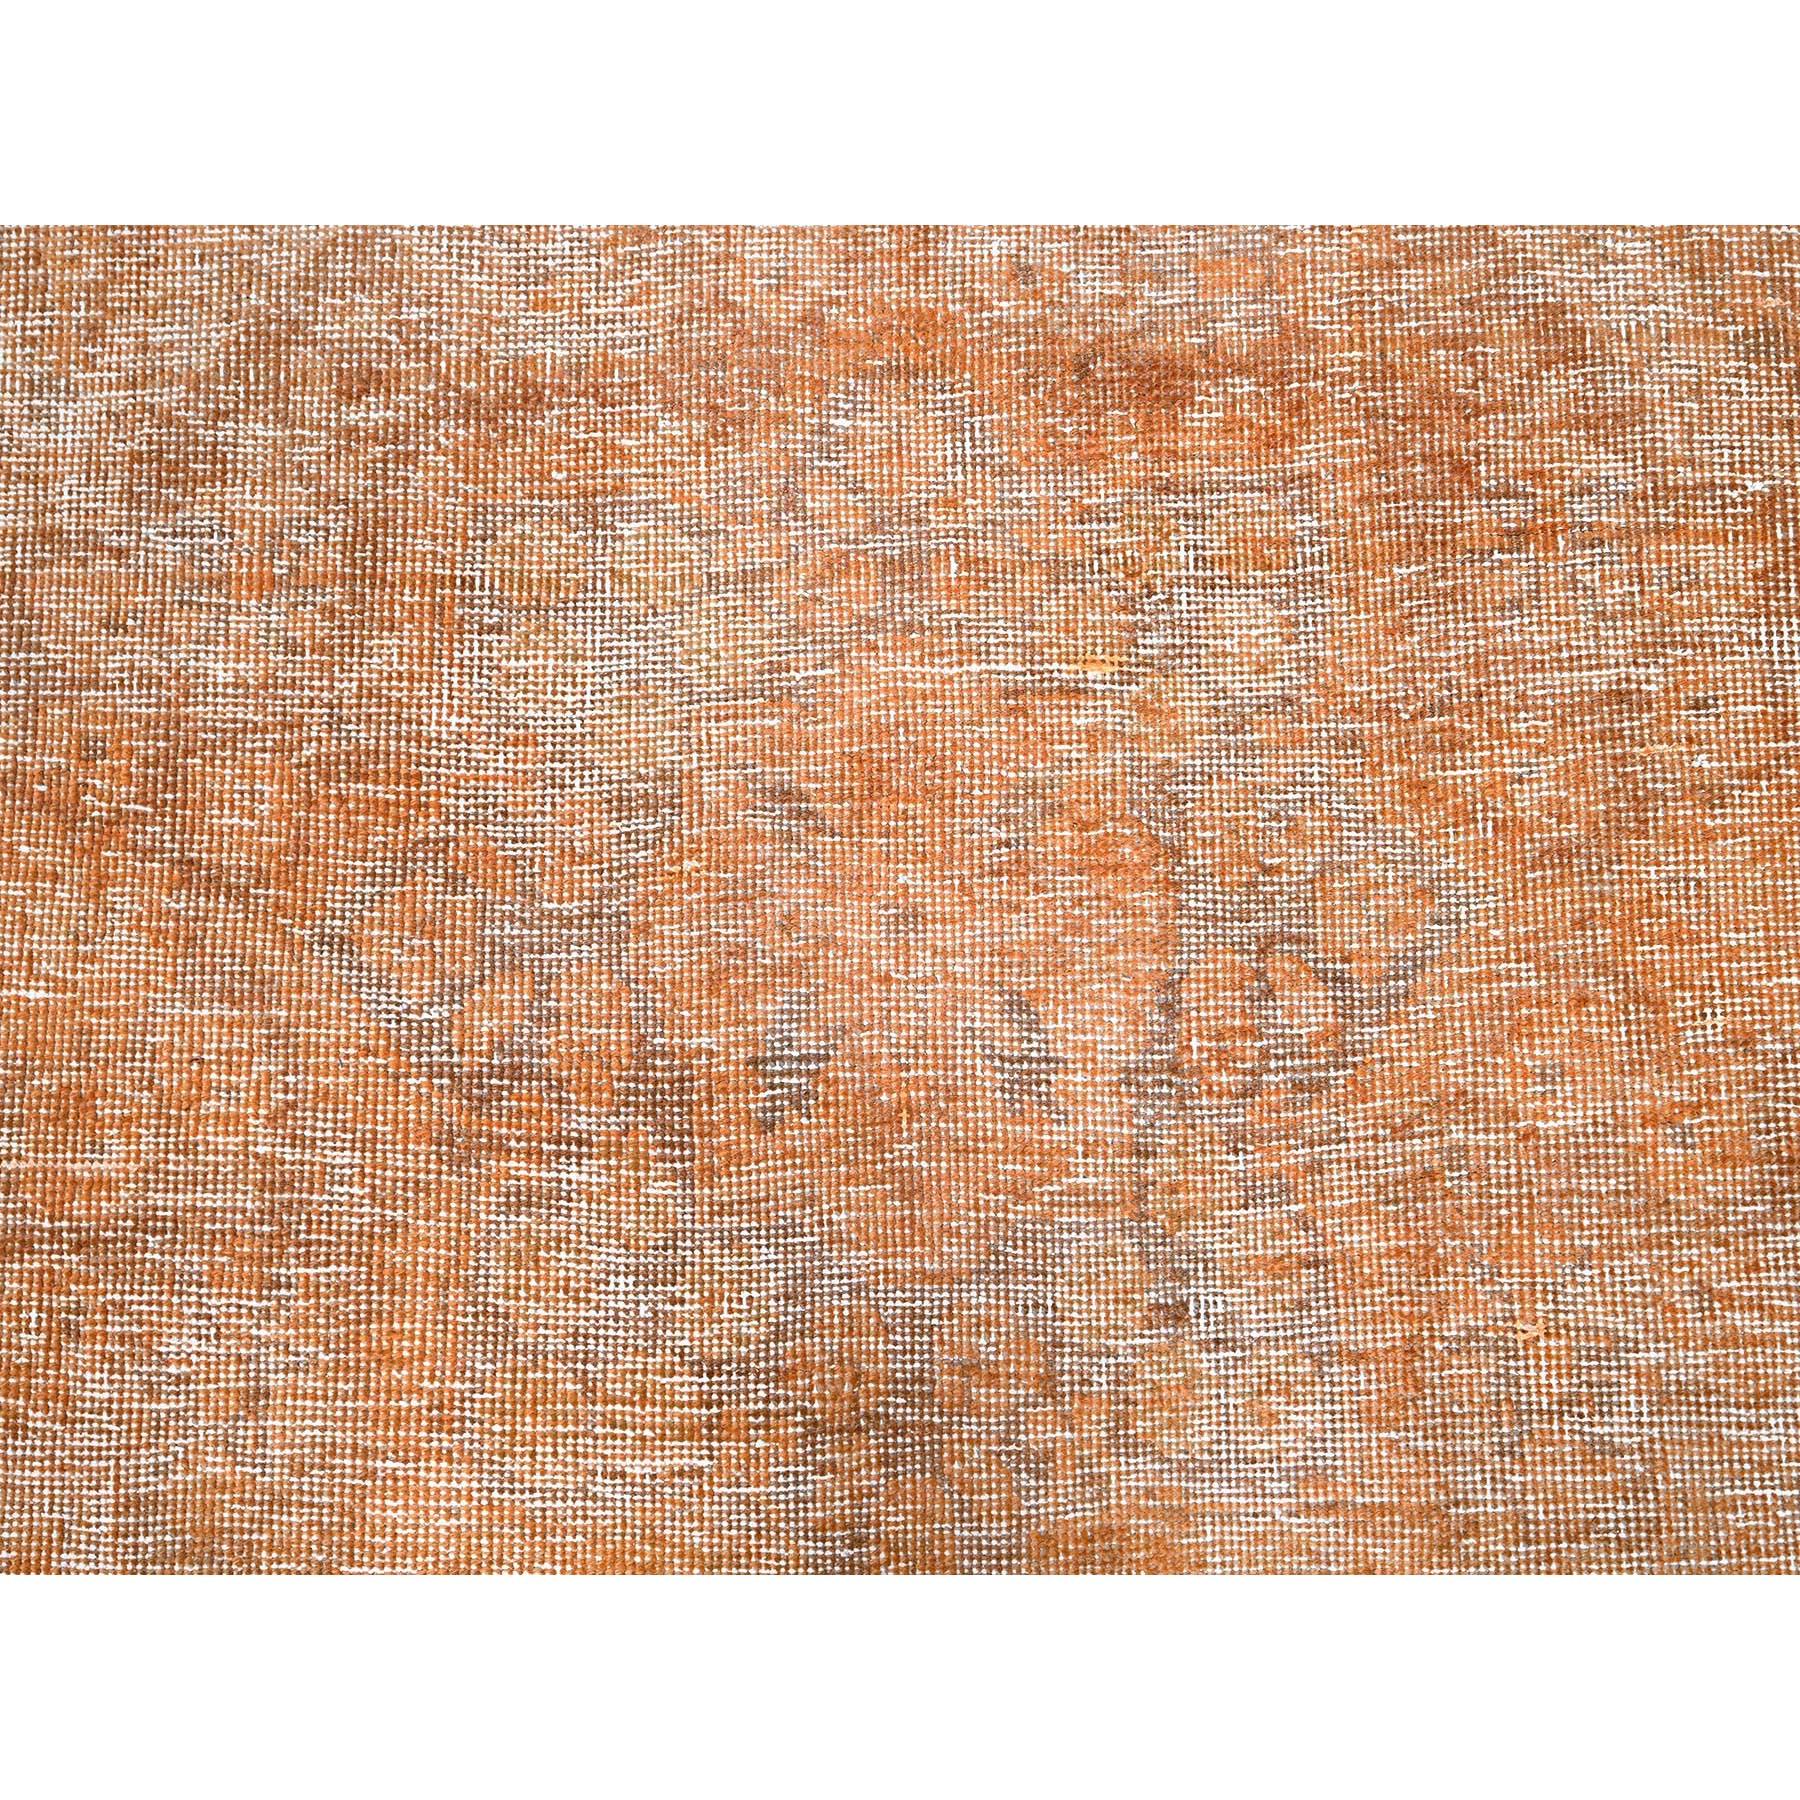 Orange Overdyed Old Persian Tabriz Distressed Evenly Worn Hand Knotted Wool Rug For Sale 4